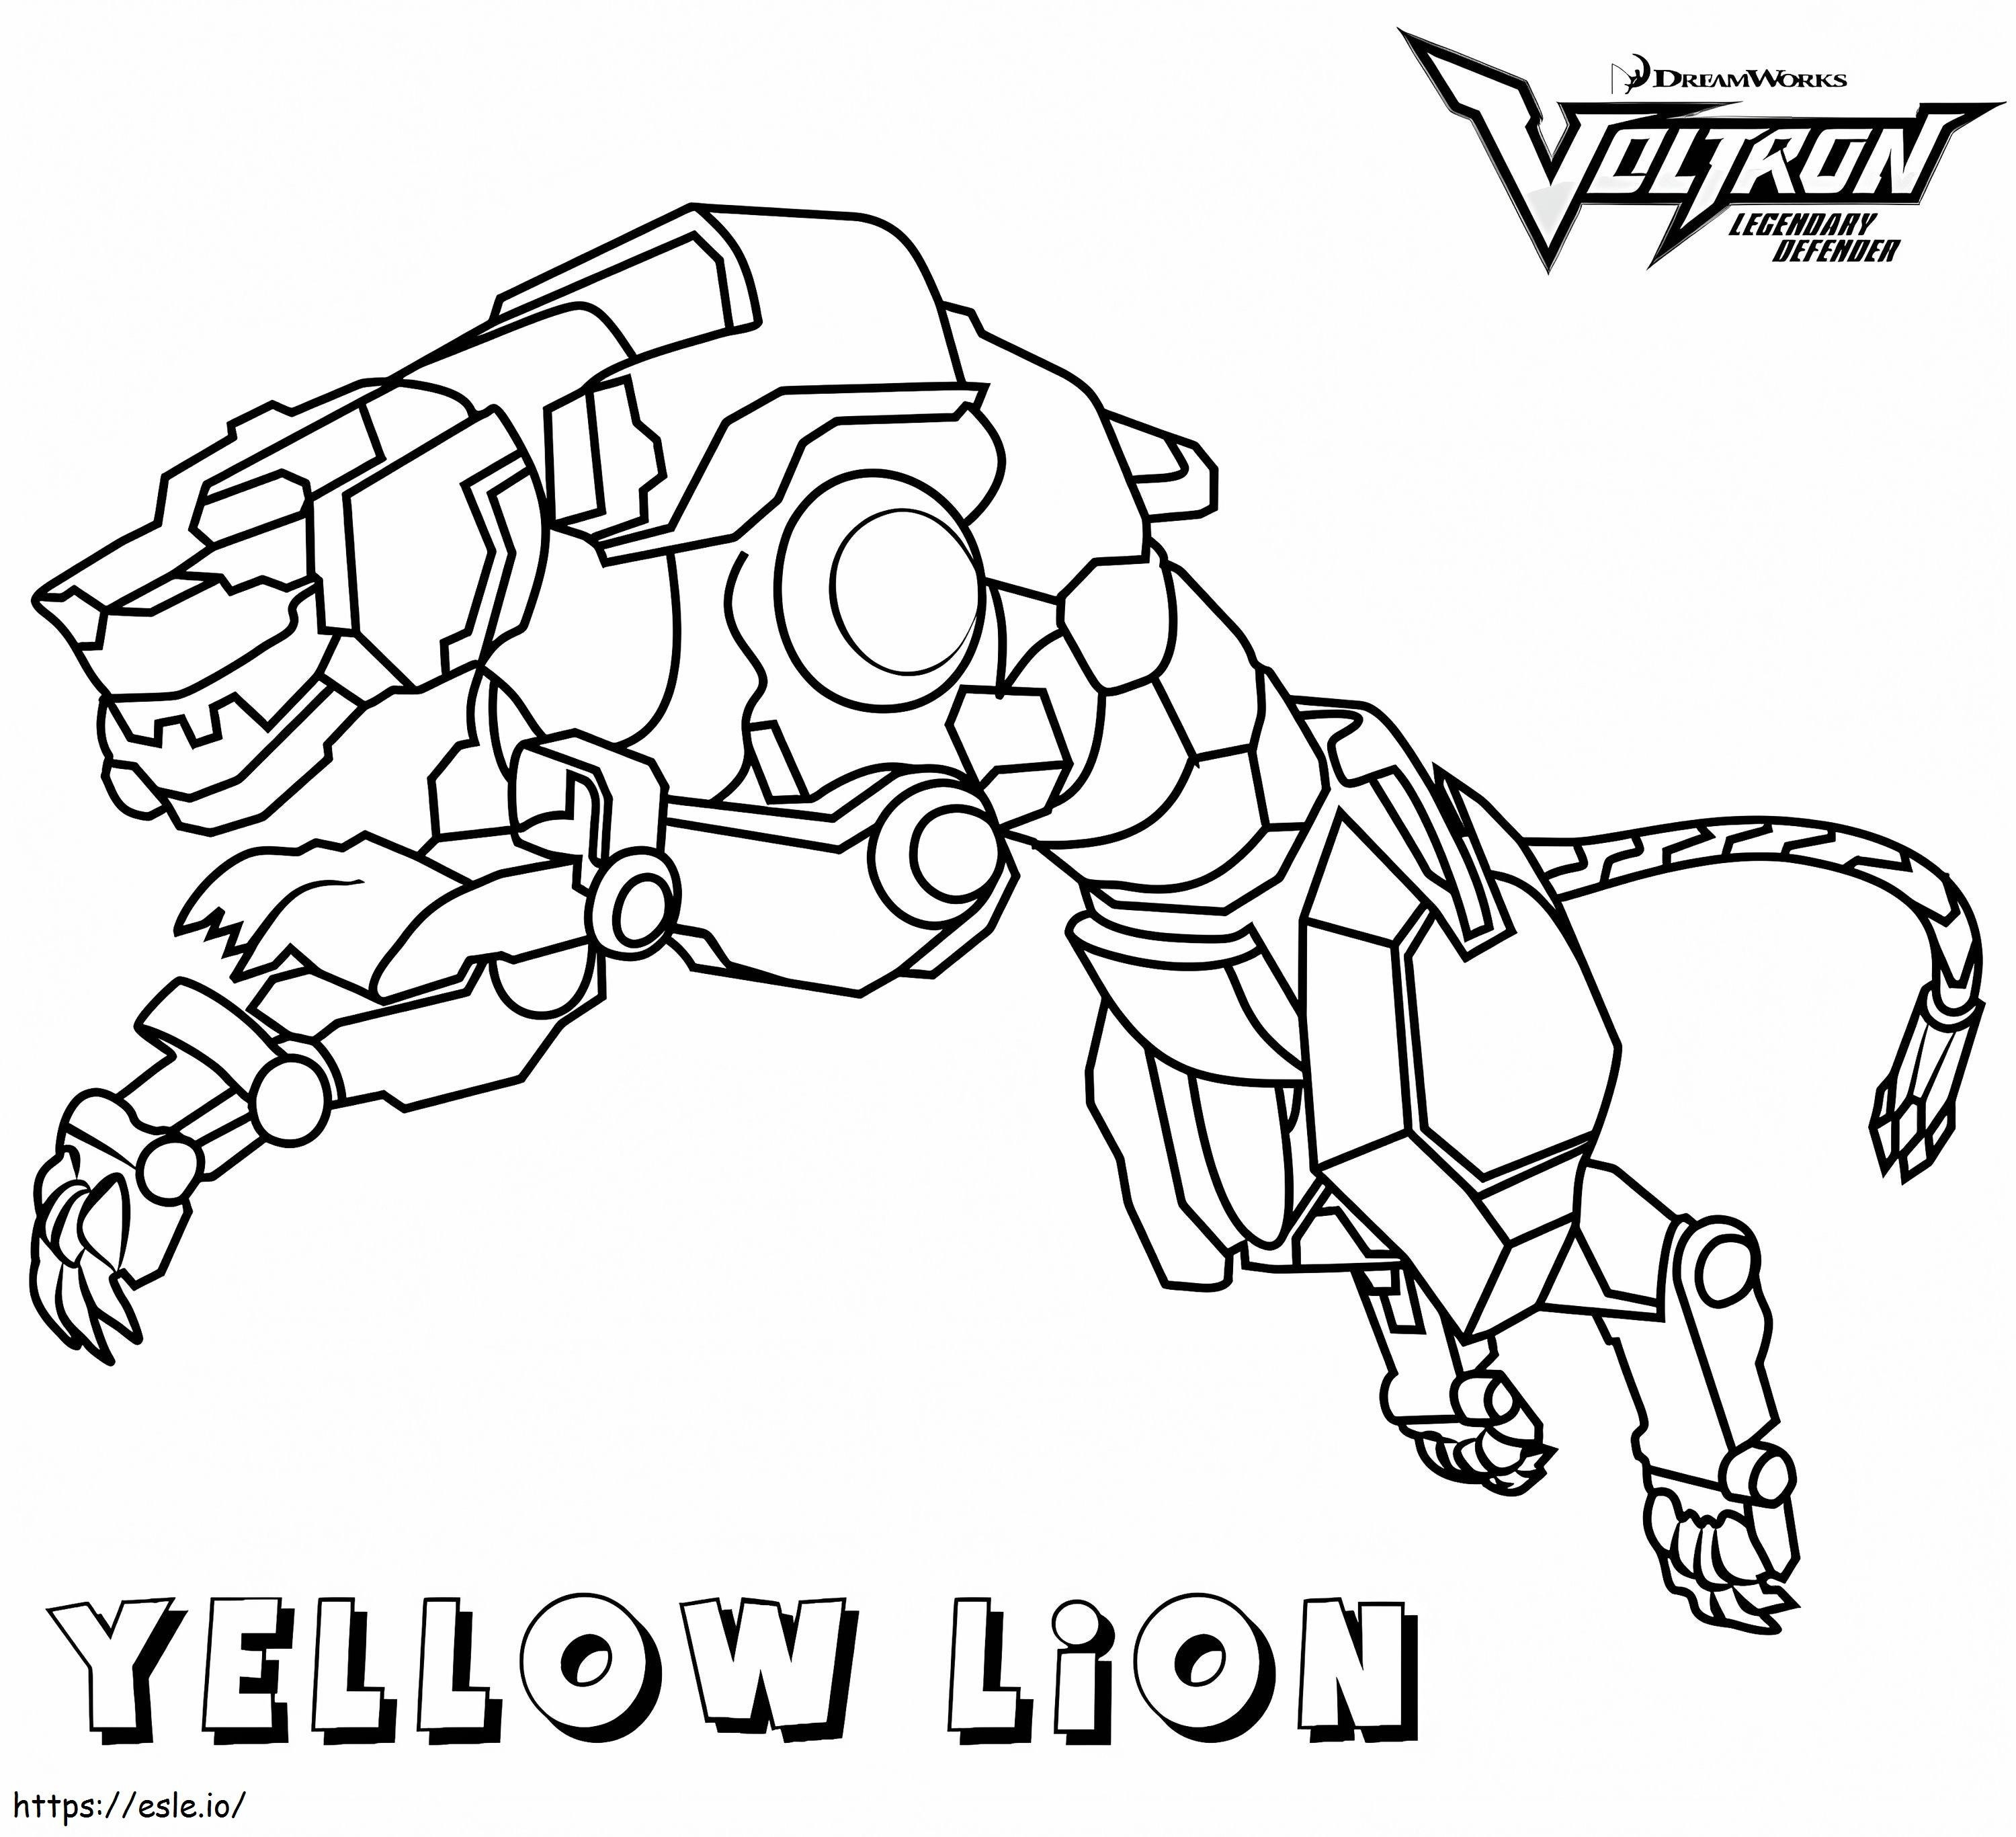 Voltron Yellow Lion coloring page